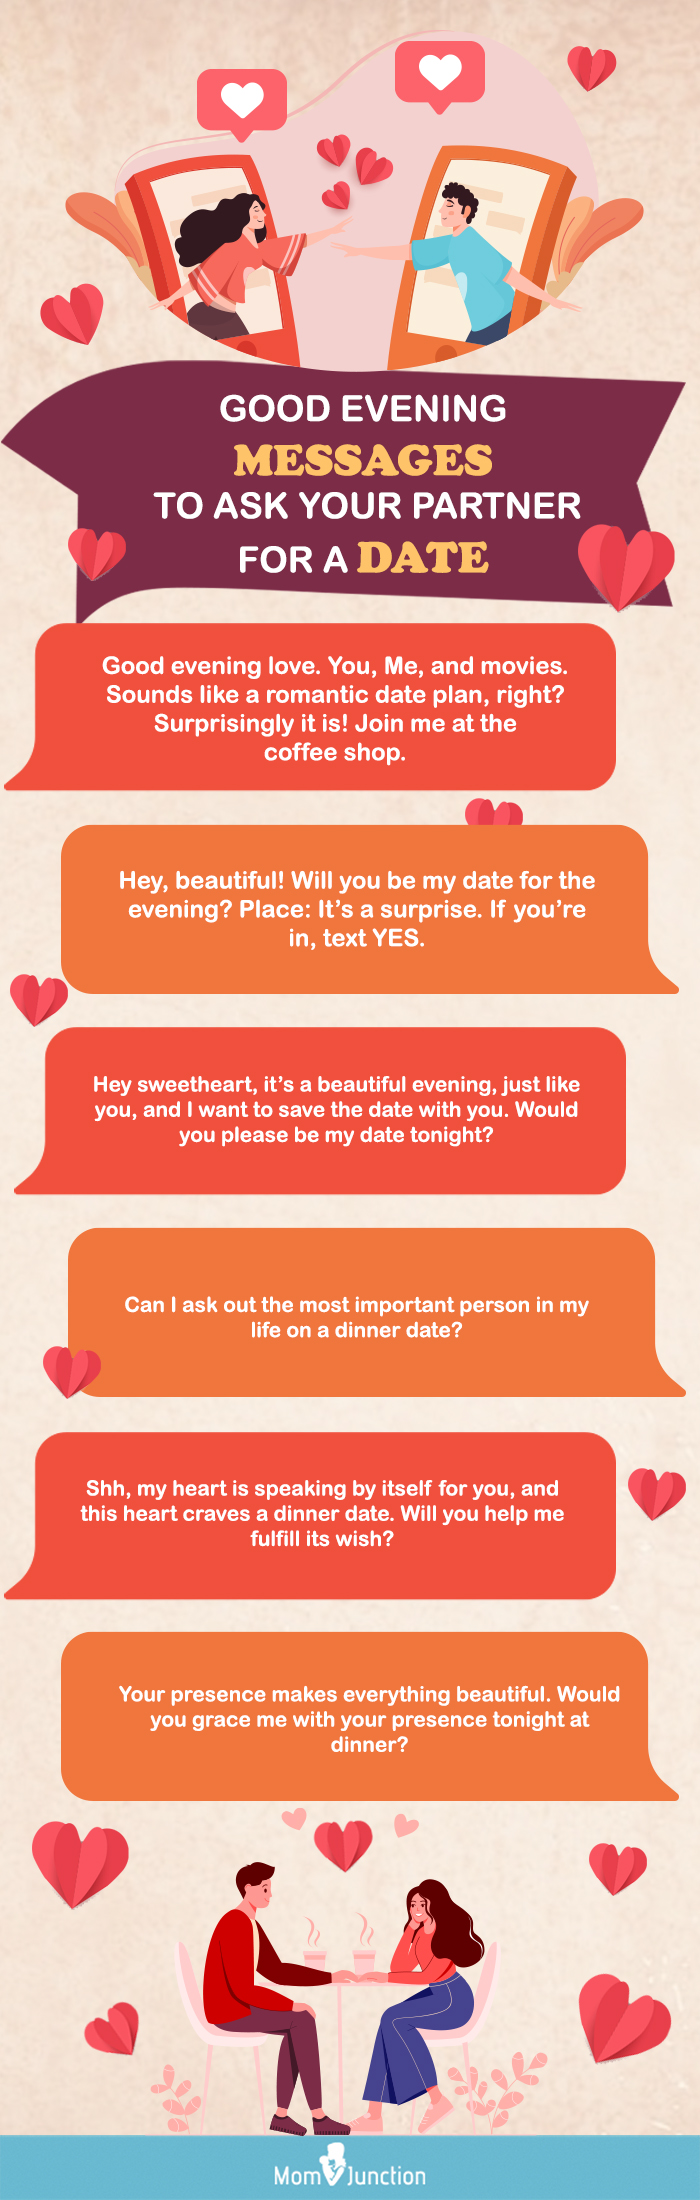 good evening love messages to ask for a date [infographic]